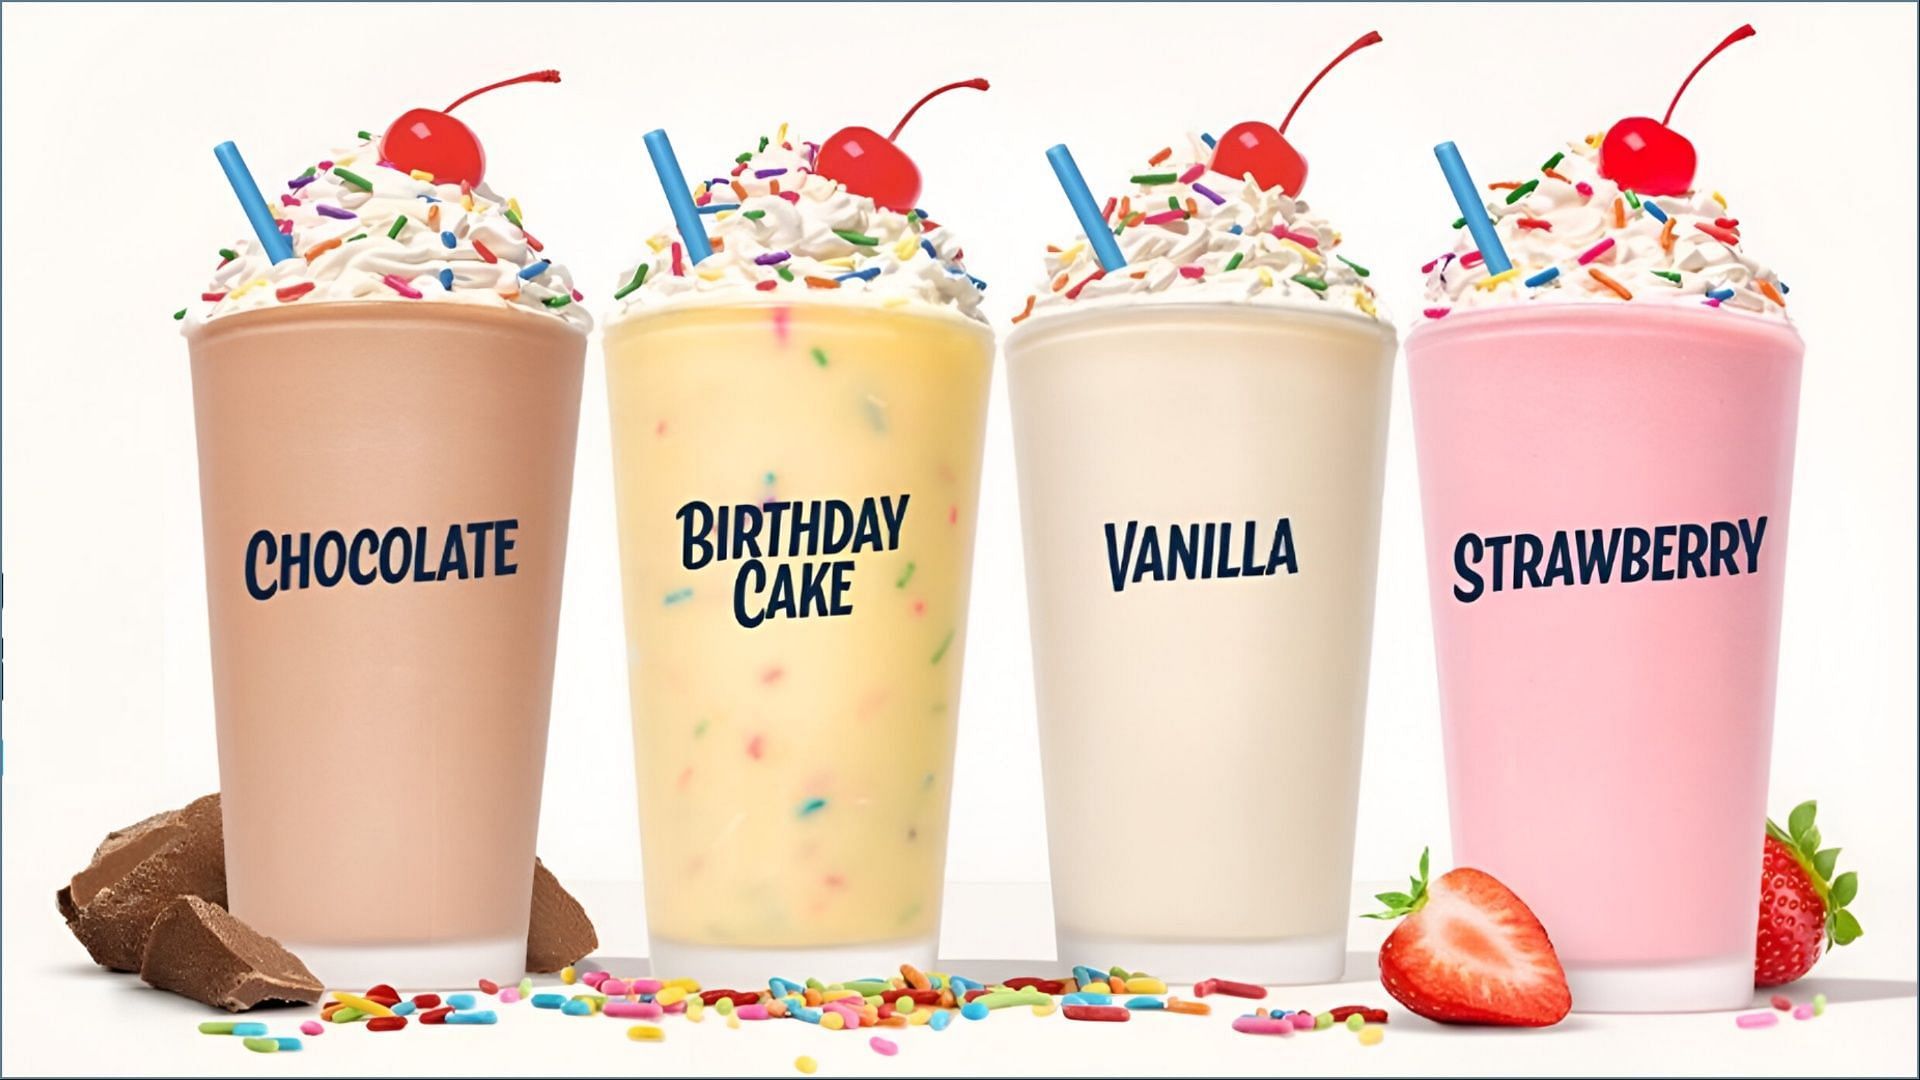 The returning milkshakes are priced at $4.99 each (Image via Zaxby&rsquo;s)